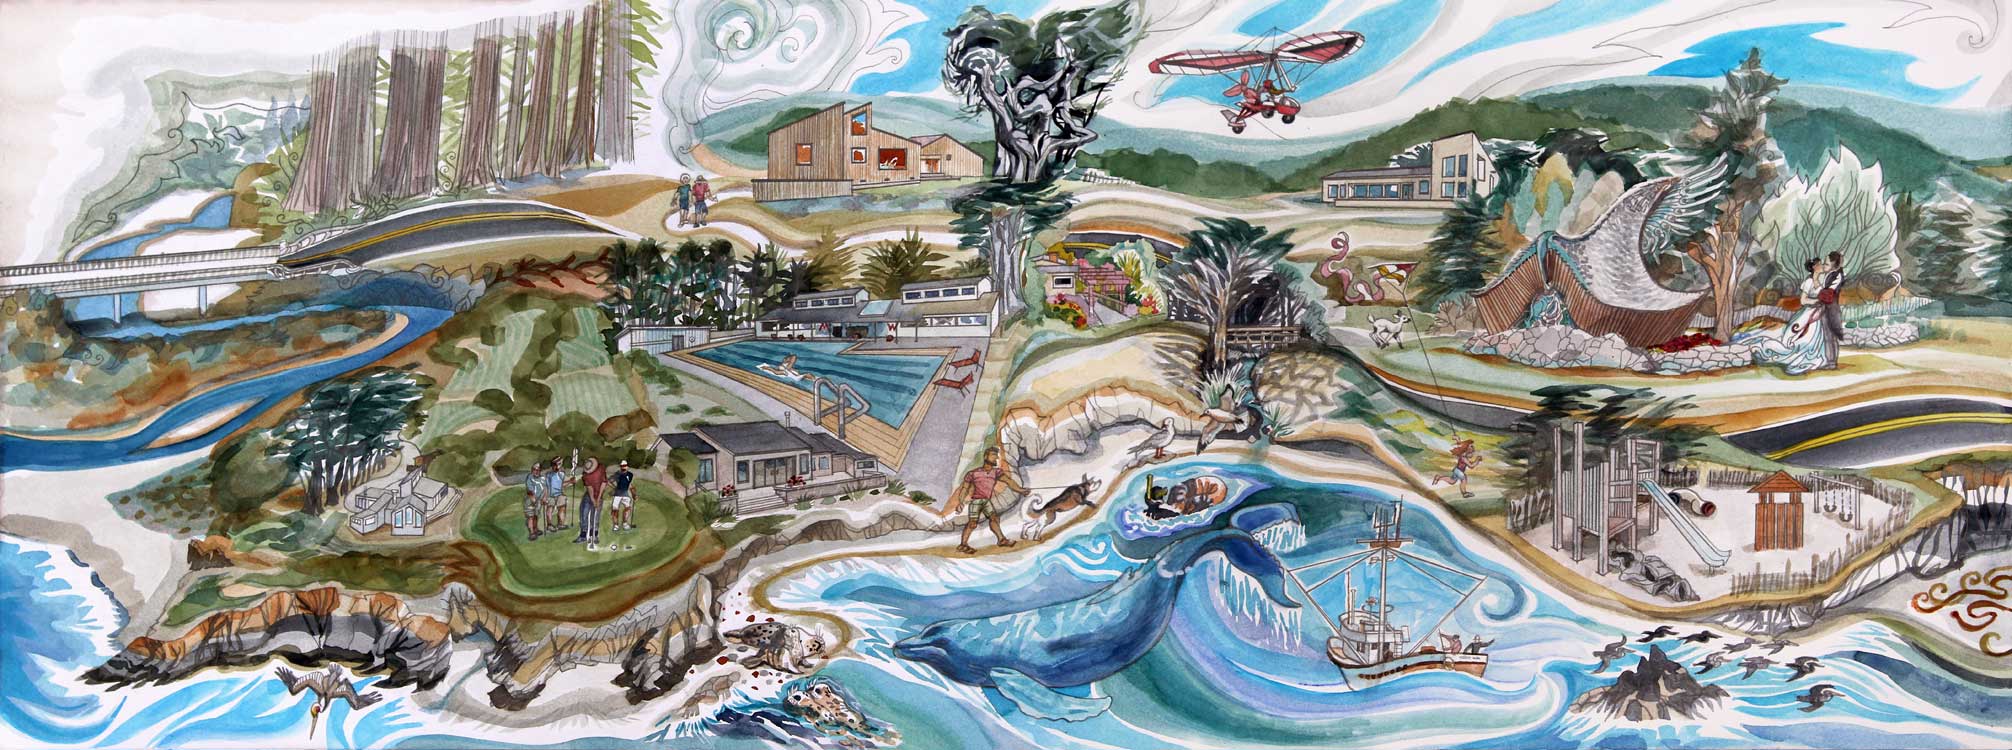 The left panel depicts the northern half of The Sea Ranch